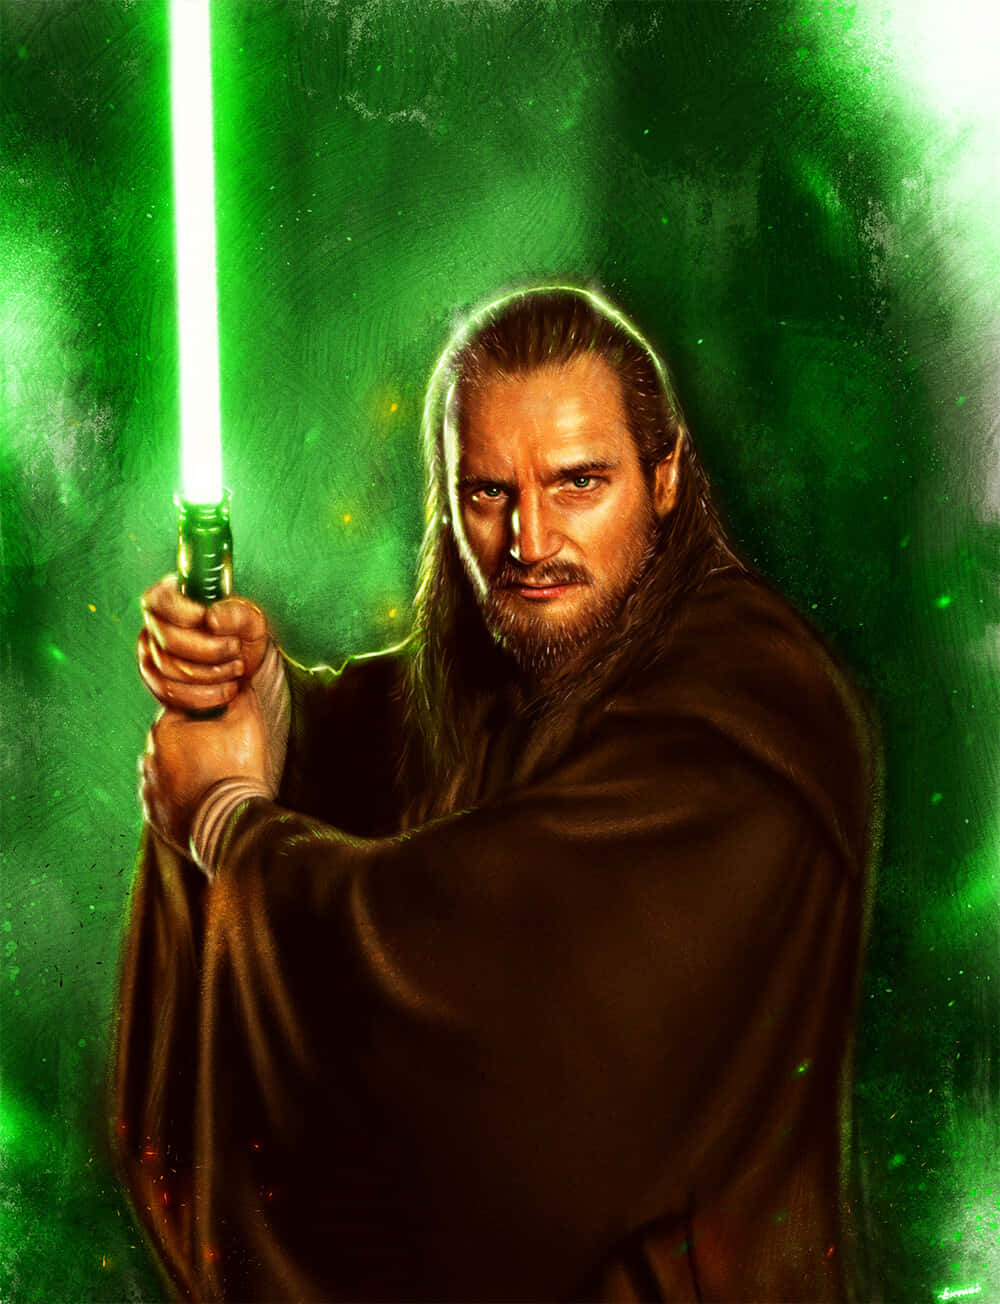 Render Driver on Instagram Whos your favorite Jedi Quick and simple  edit of Qui Gon Jinn One of my favorite Jedi My favorite Jedi is ObiWan  next one is Qui Gon